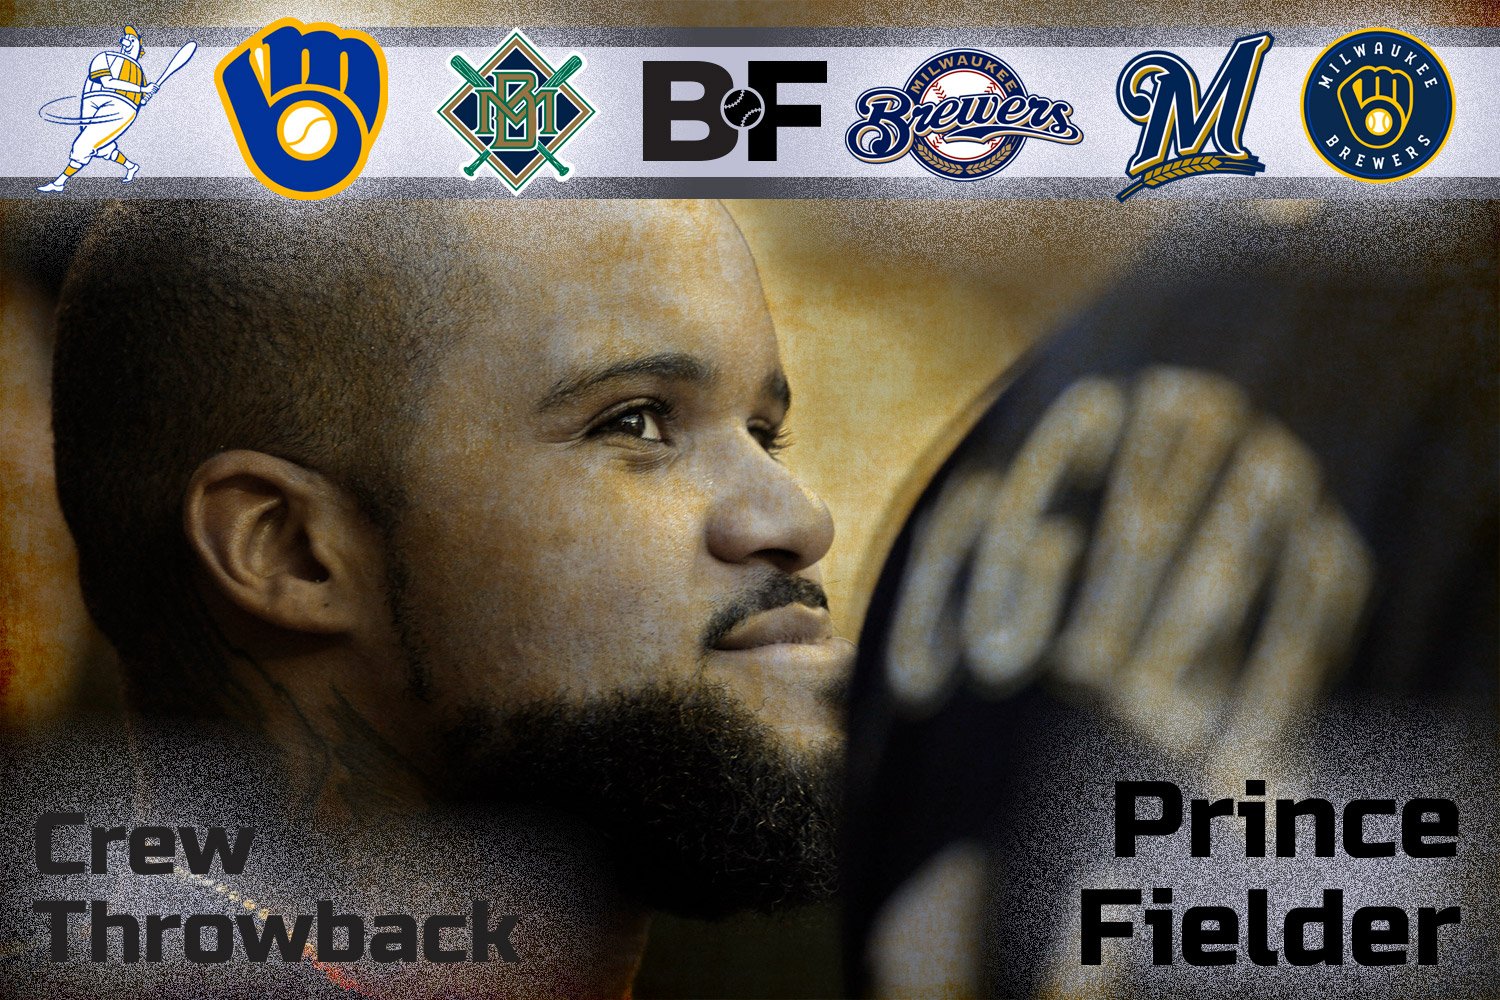 Prince Fielder, the Most Feared Hitter in Brewer History - Brewers